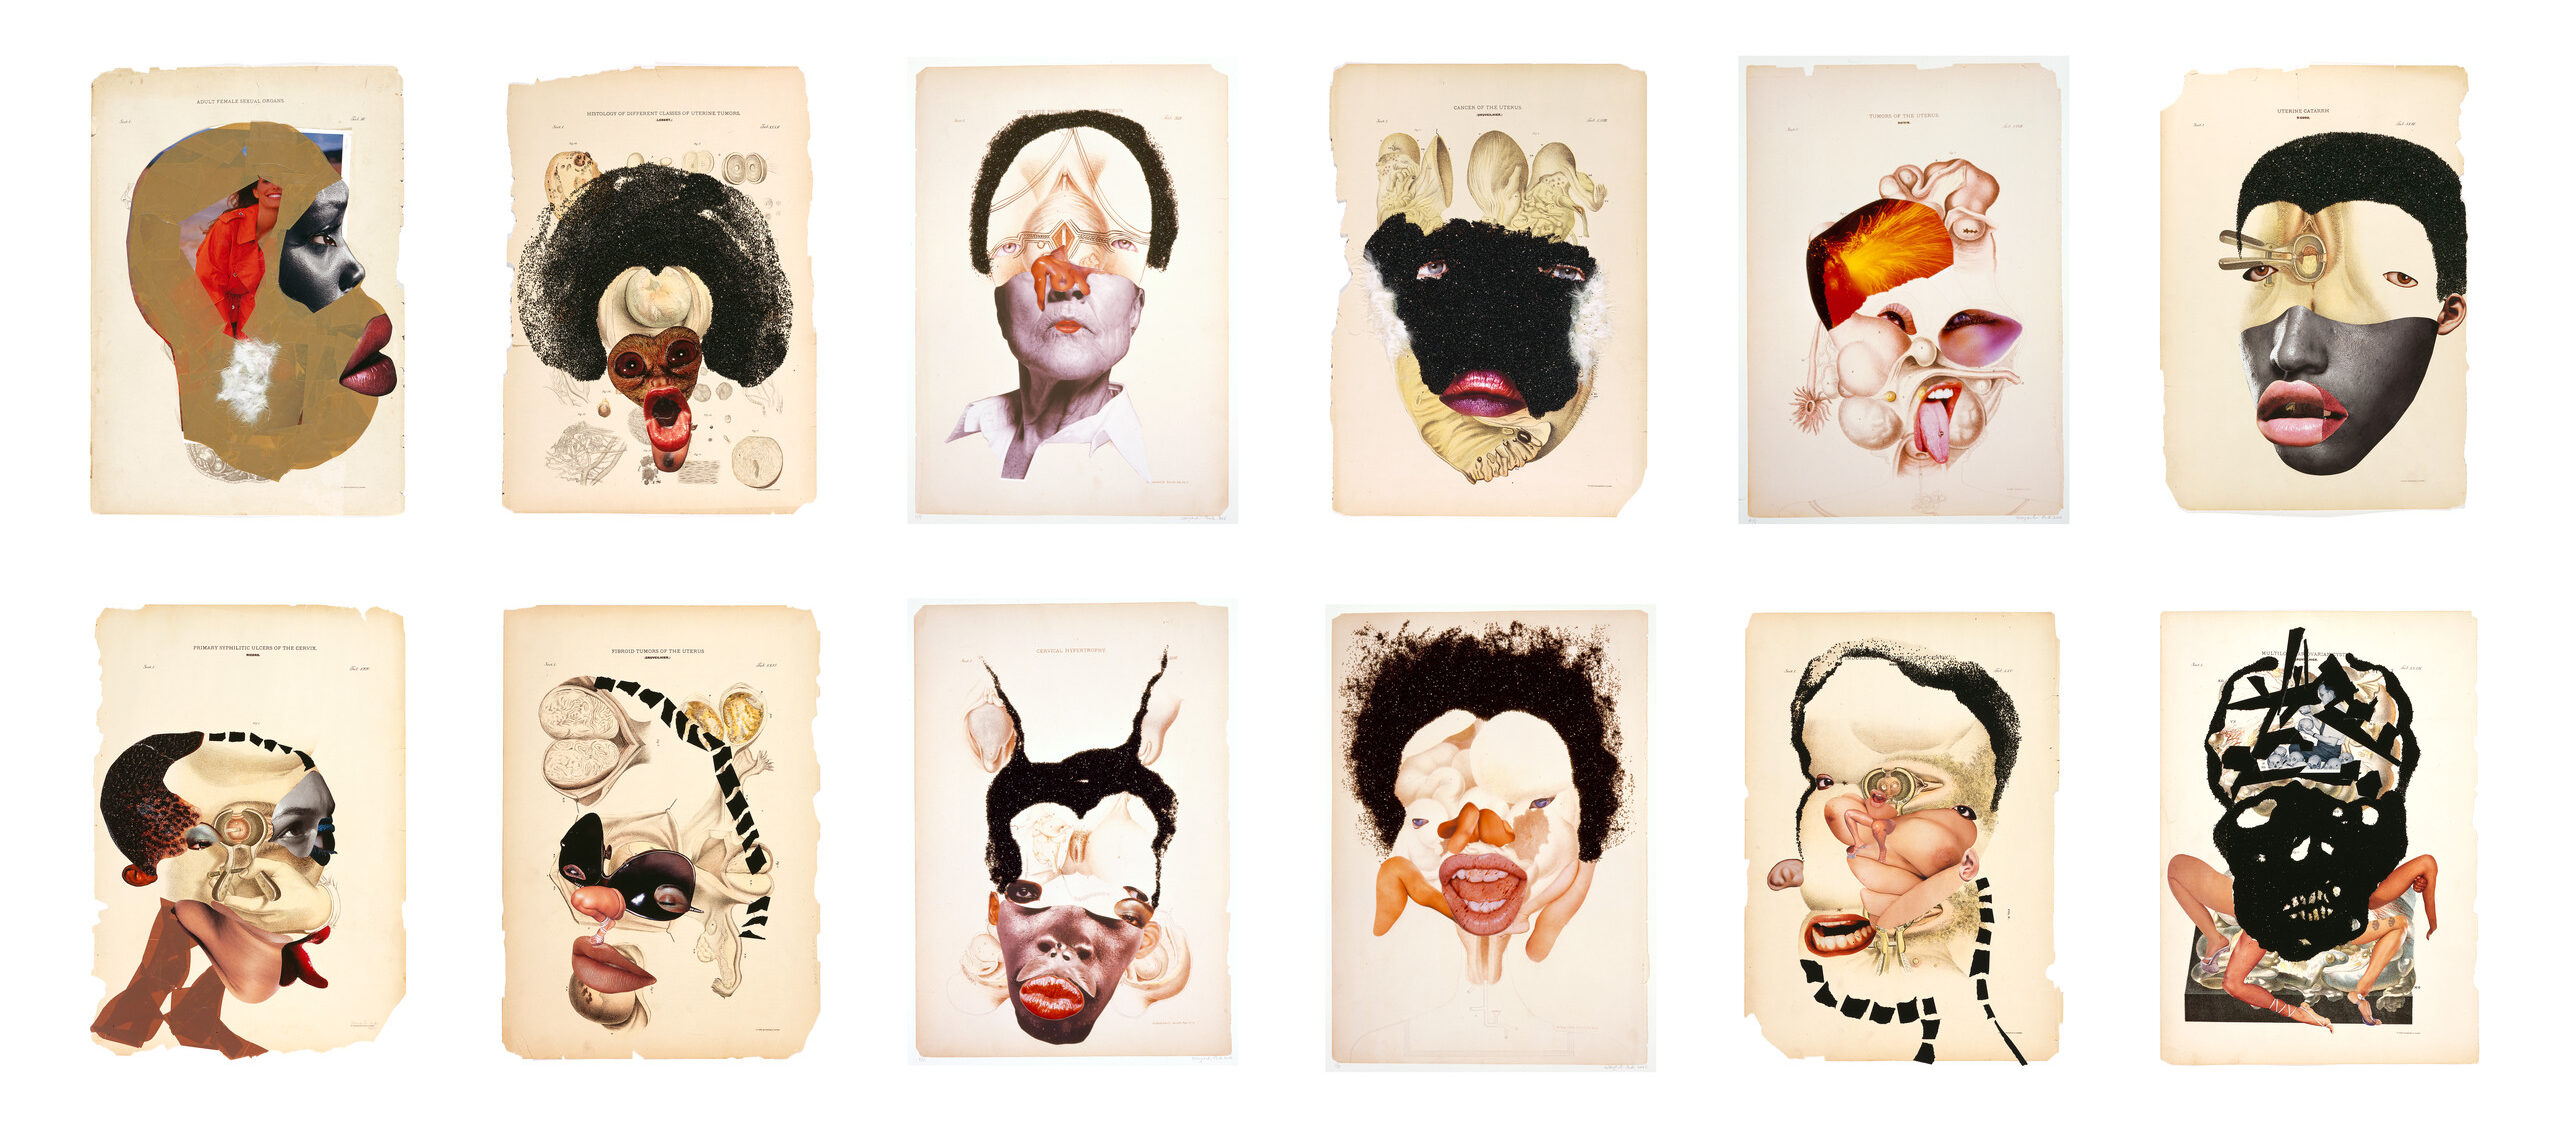 A group of twelve images in a grid shows faces that are collaged together from various separate images showing facial features, internal organs, and ambiguous elements. Most of the faces appear to show women with dark skin tone, and the other images evoke medical illustrations.Any detail must be accompanied by a grid image of all works in series